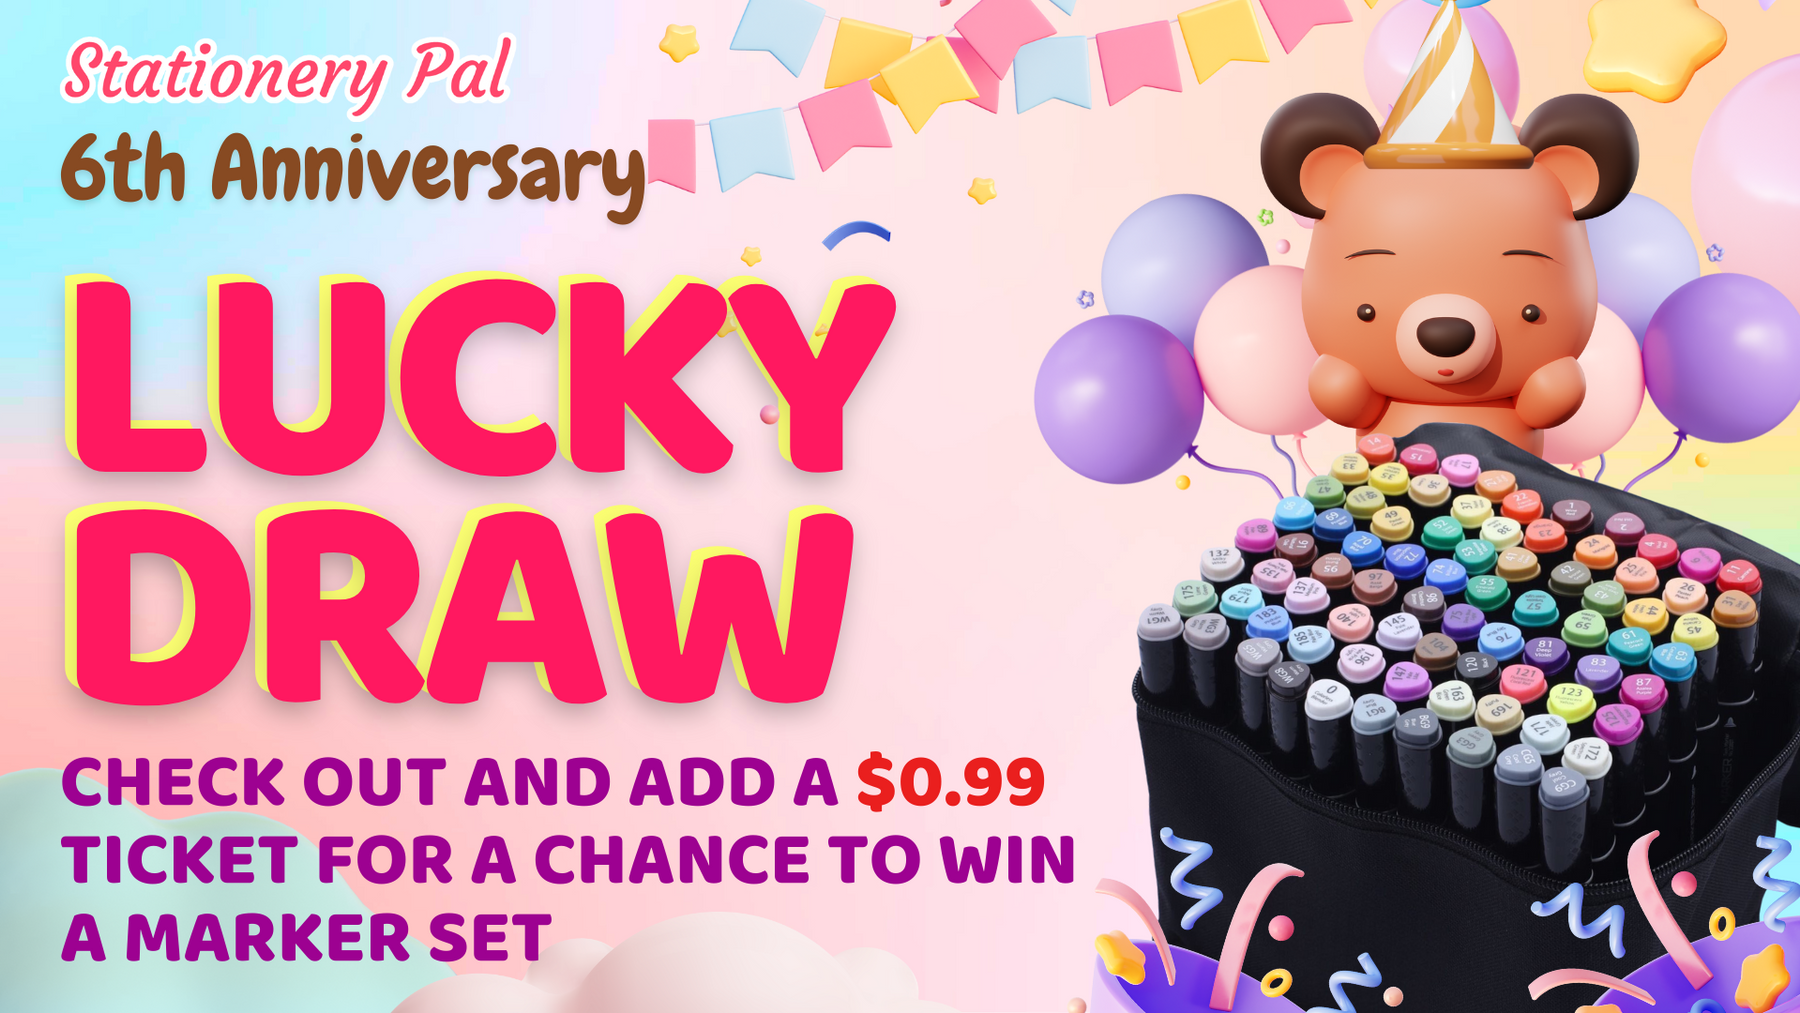 ✏️Join the Celebration and Test Your Luck at Our Lucky Draw!